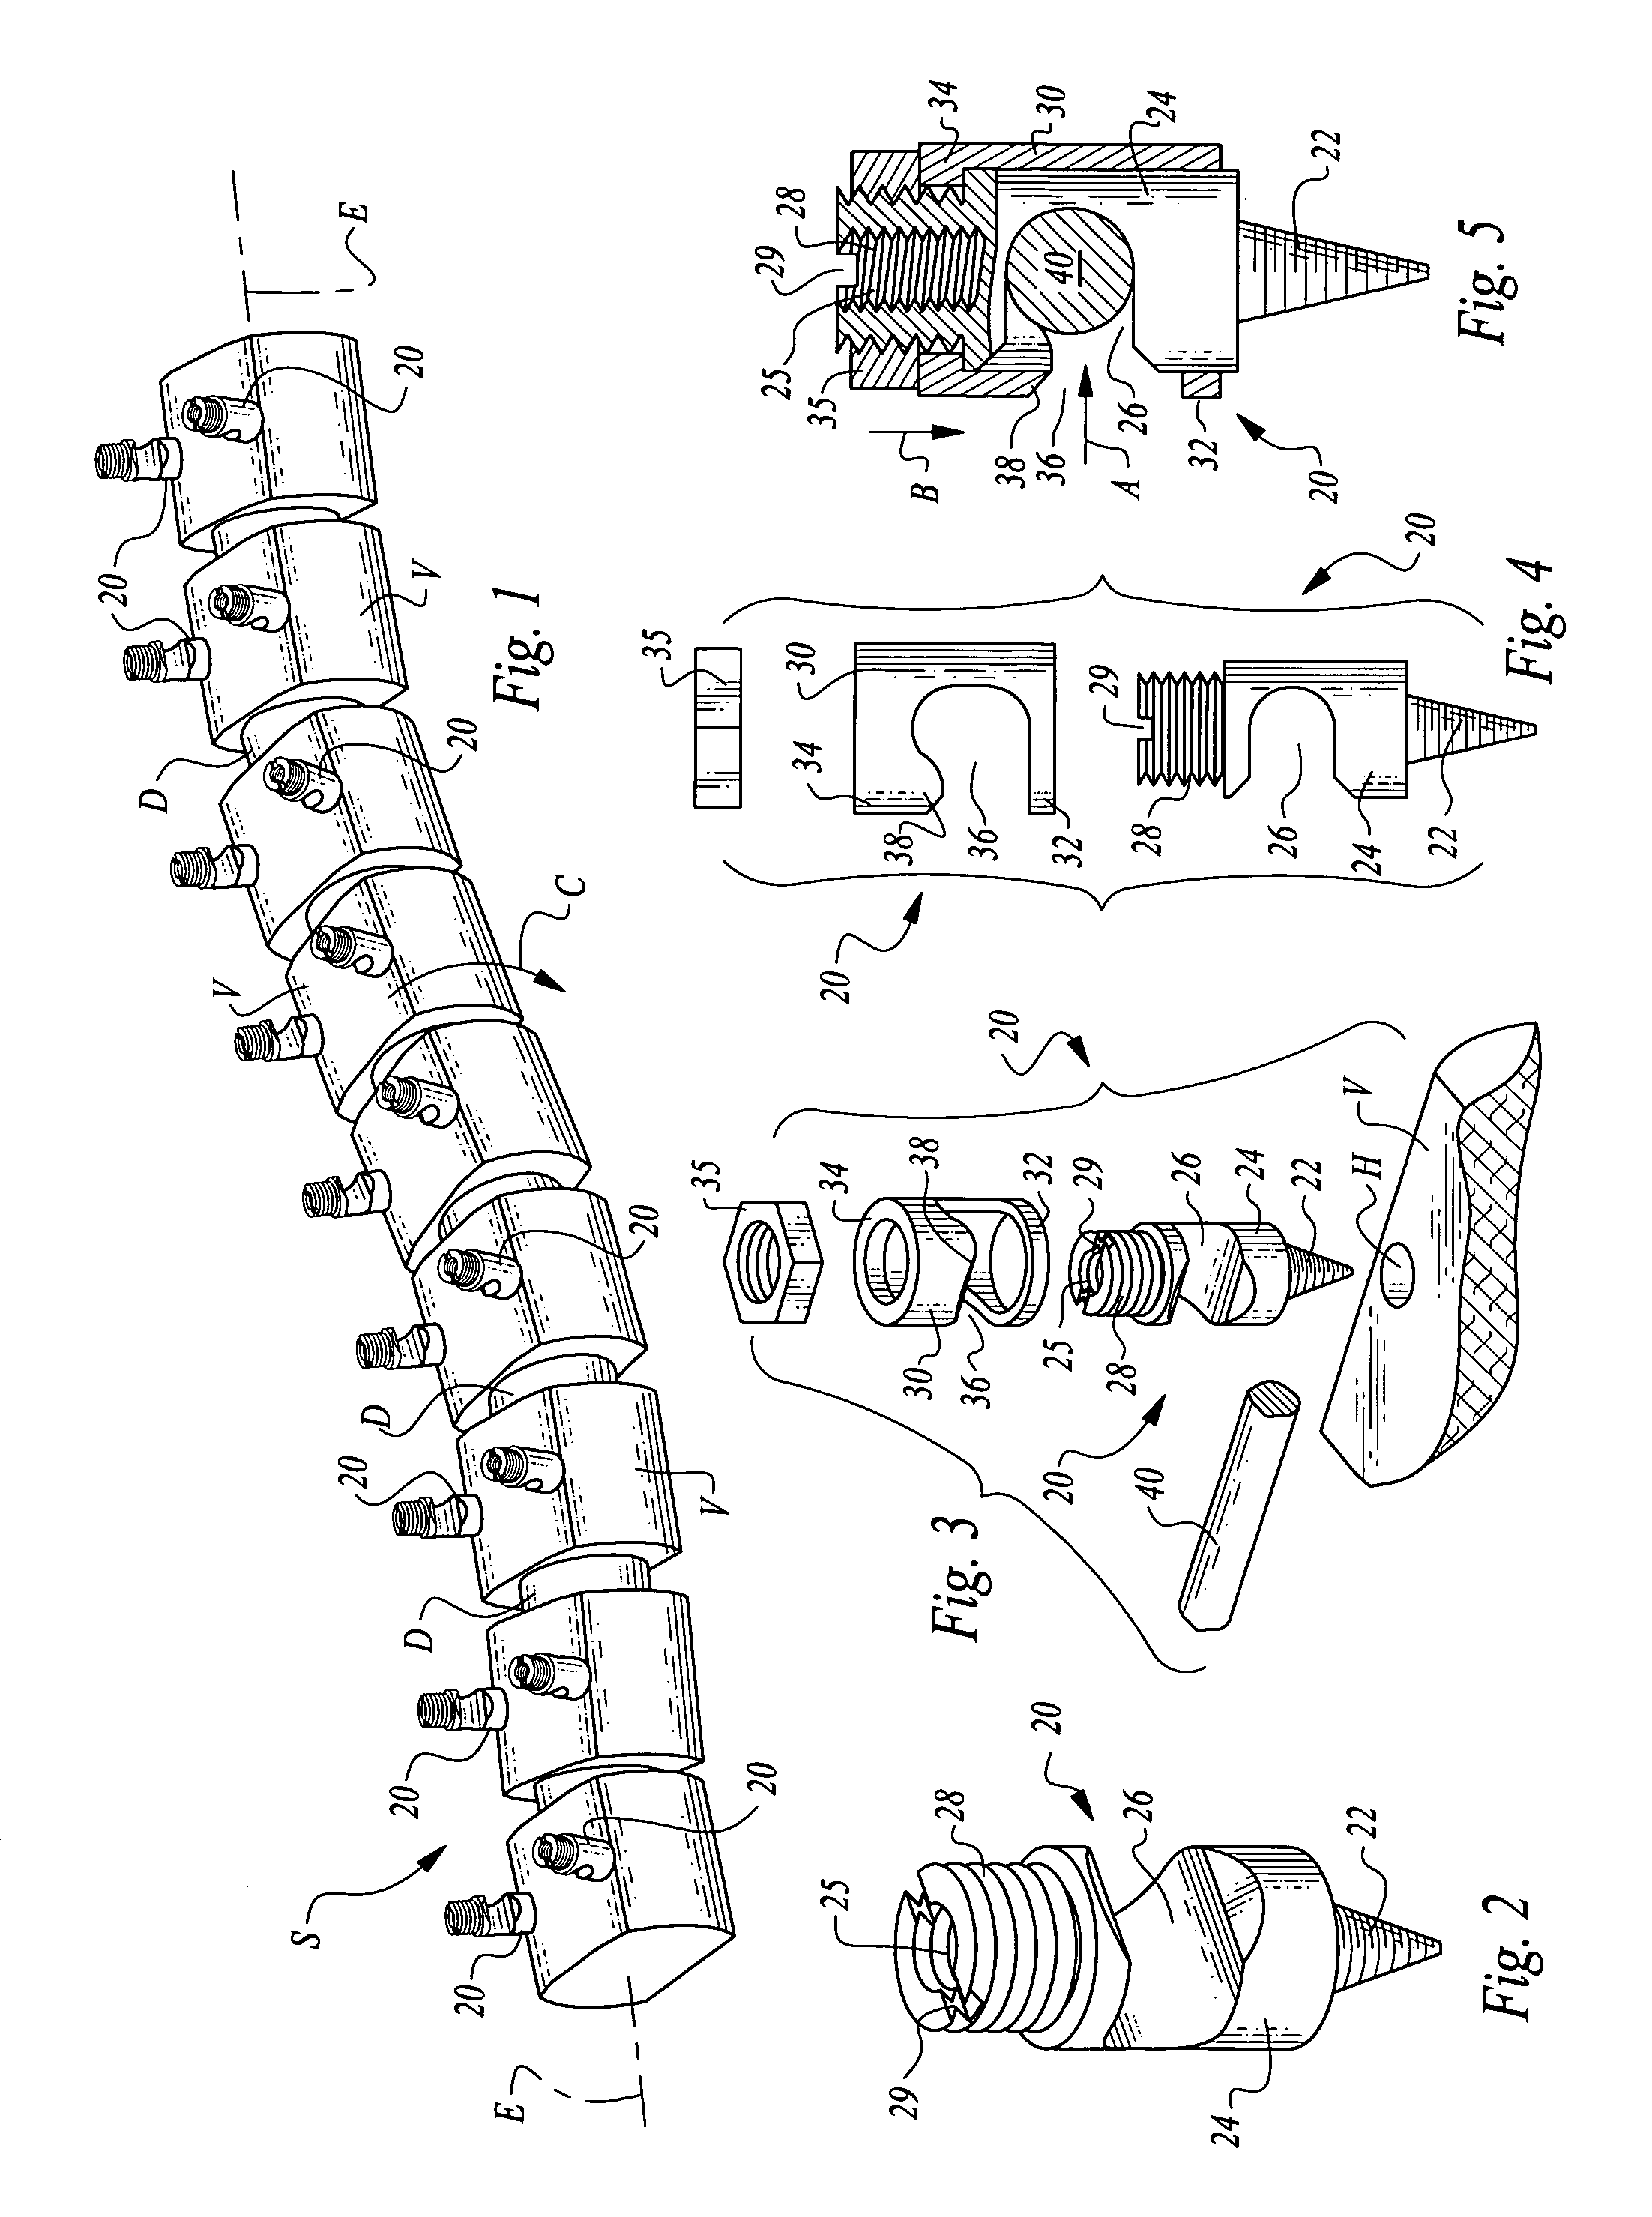 Scoliosis de-rotation system and method